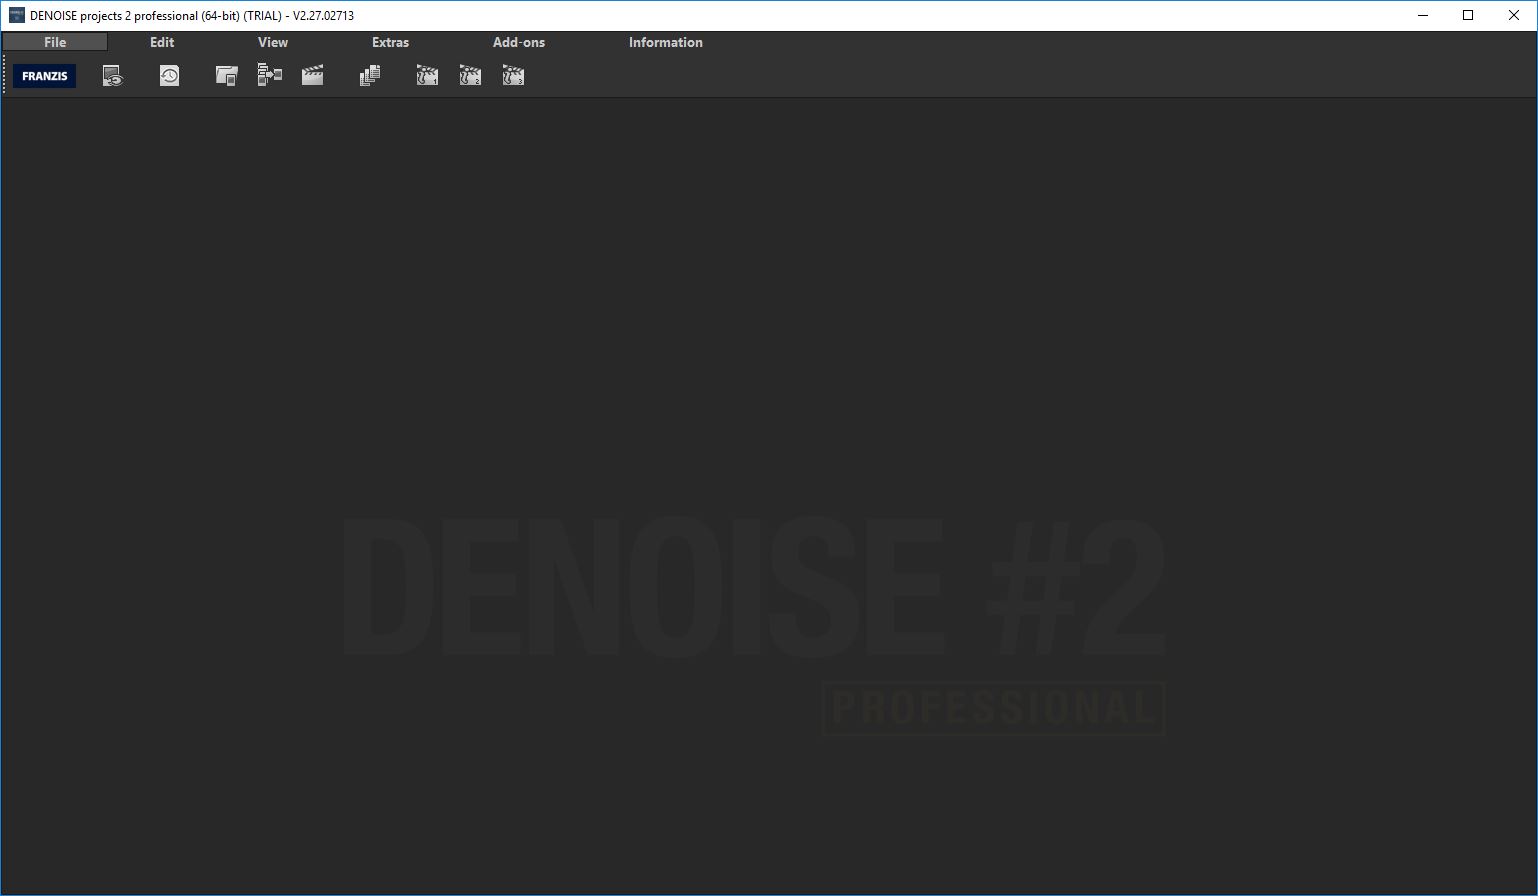 denoise projects professional download